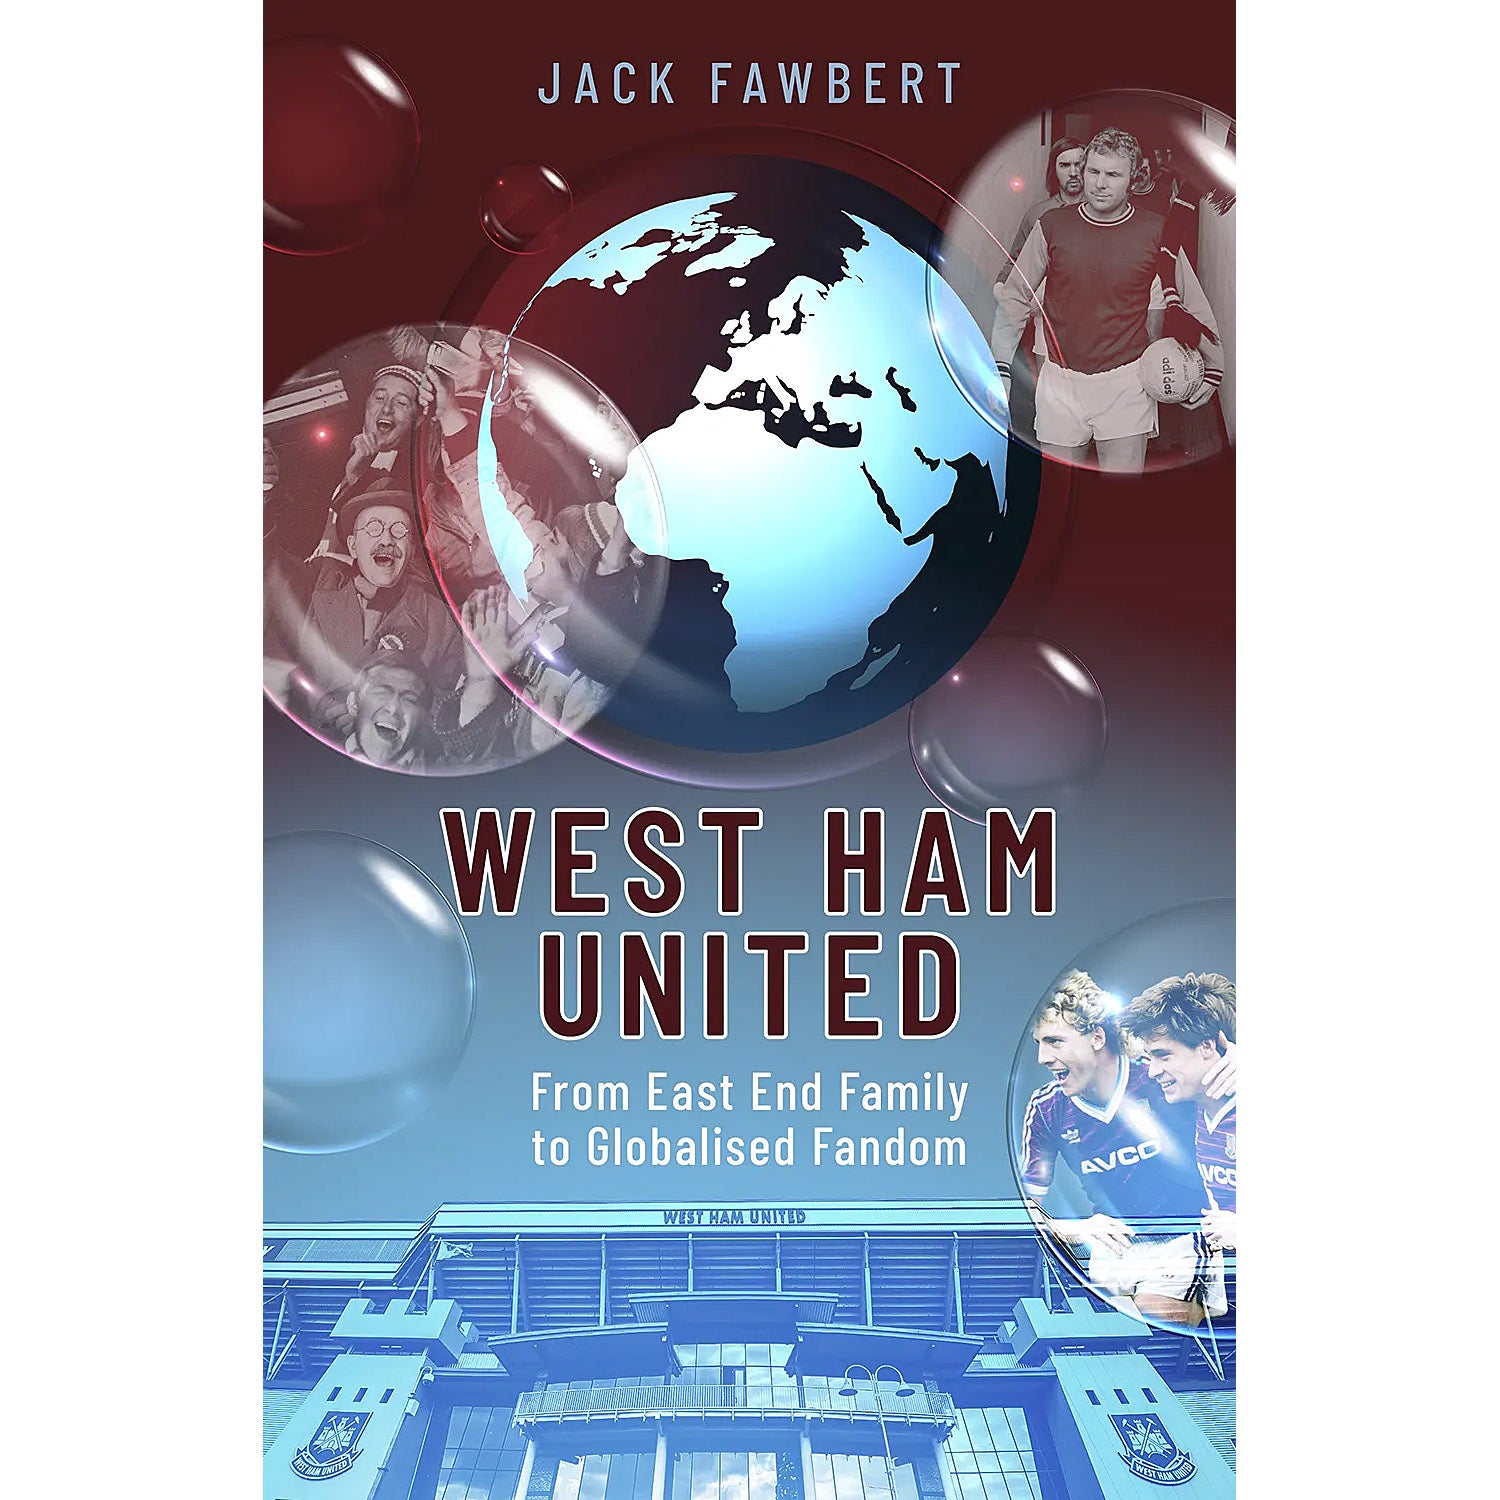 West Ham United – From East End Family to Globalised Fandom